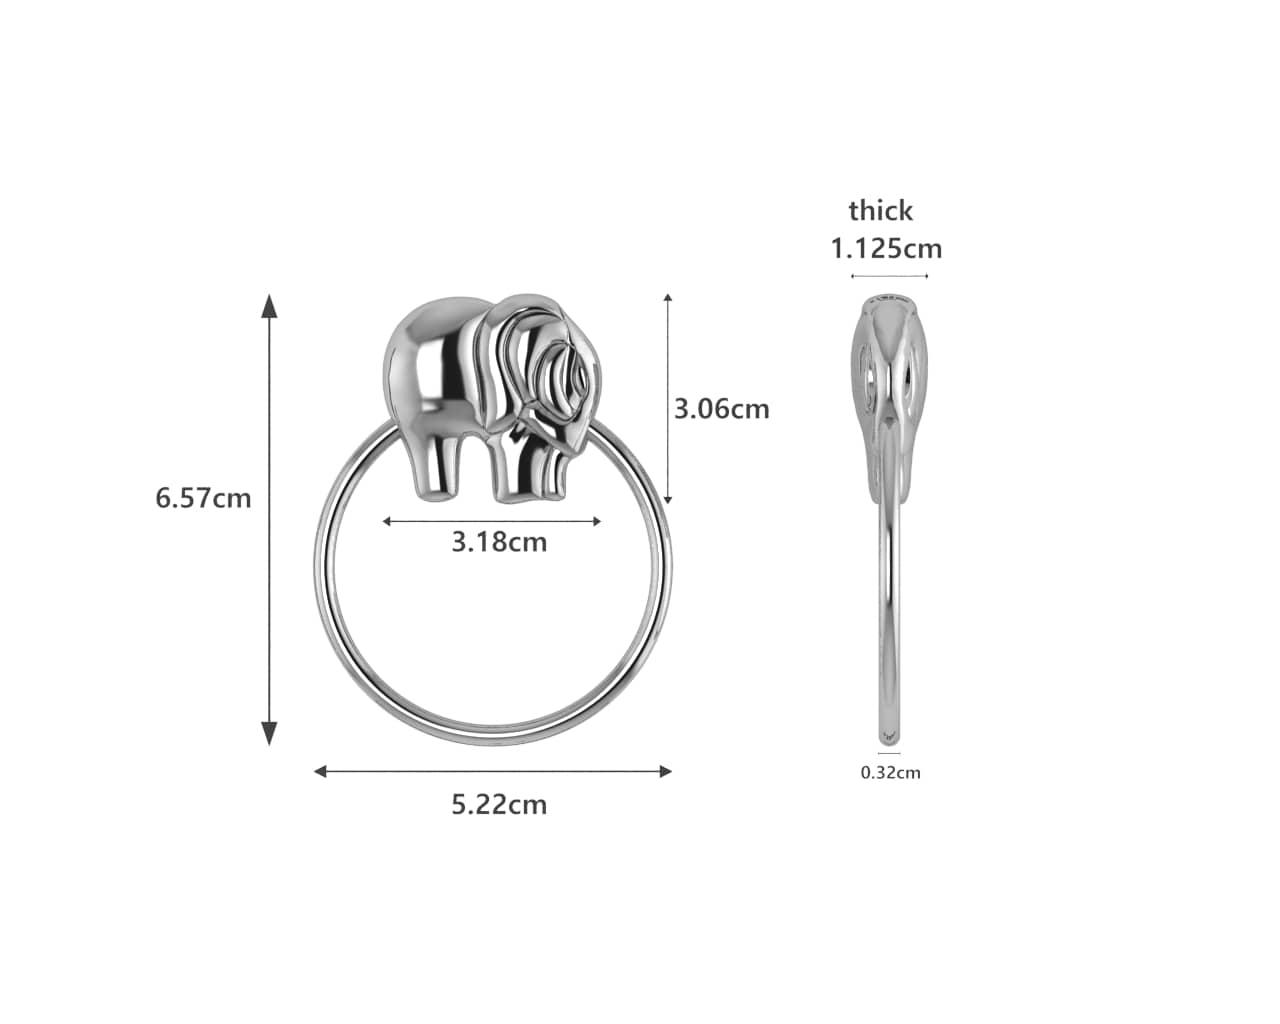 Sterling Silver Elephant Ring Baby Rattle